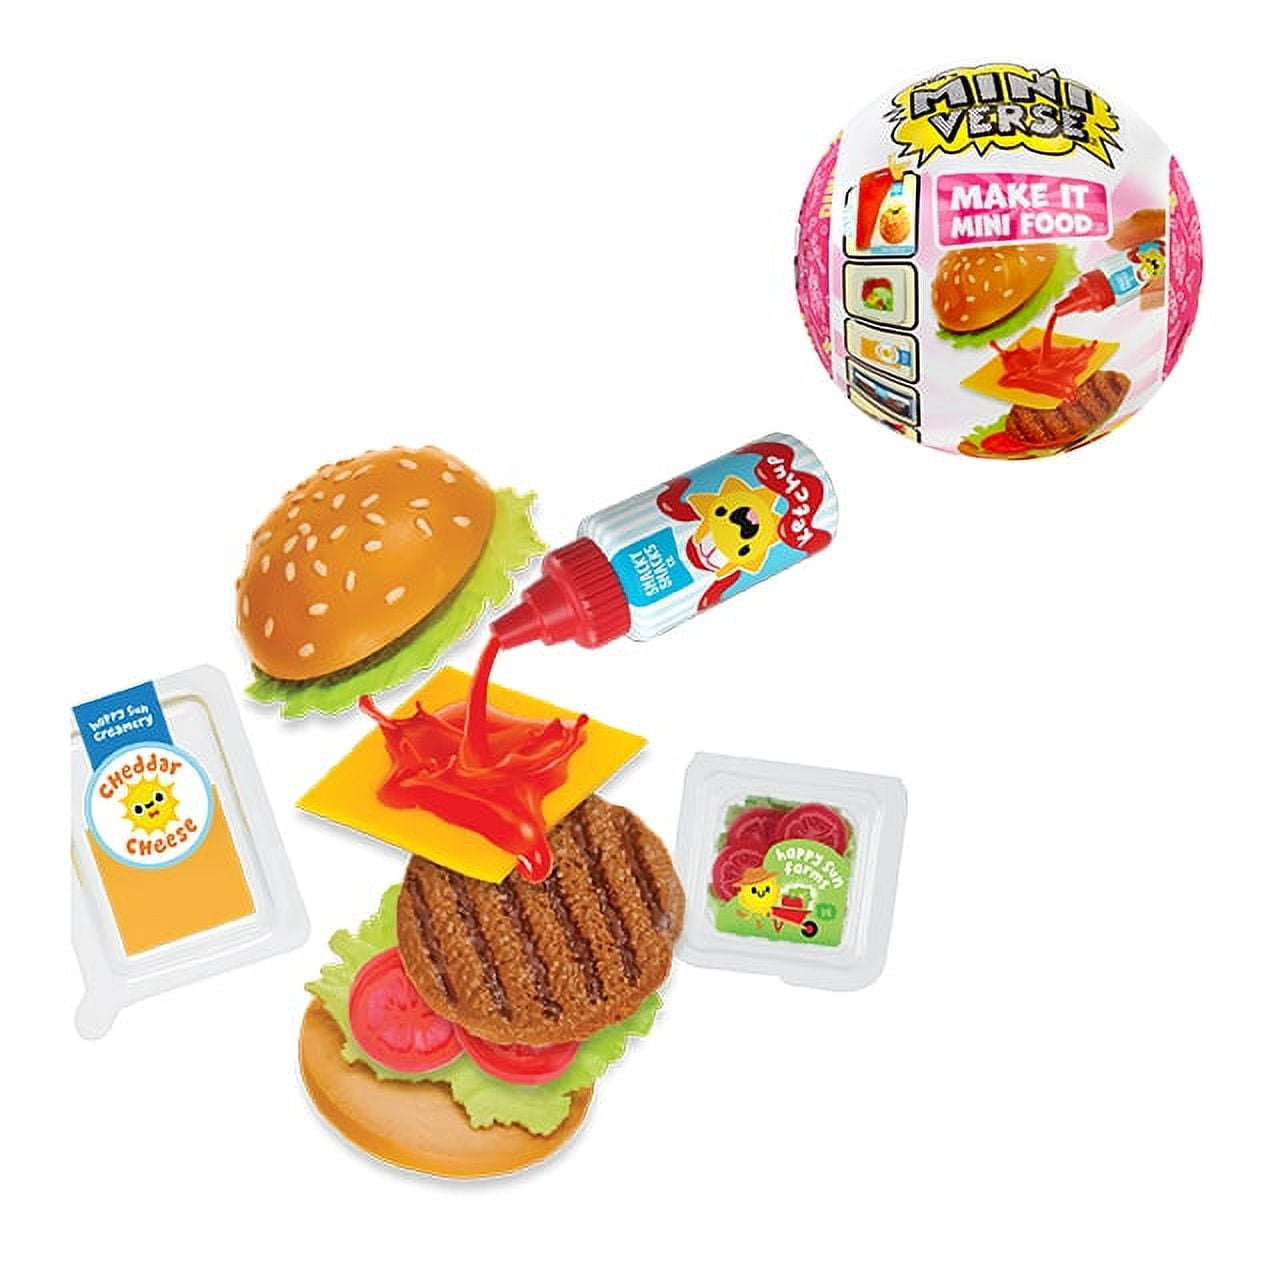 Top1Toys Aruba - Introducing the Make It Mini Food series Cafe & Diner!  🍔🍟 The only collectible mini dishes that you can make and showcase  yourself. Start your own mini culinary adventure